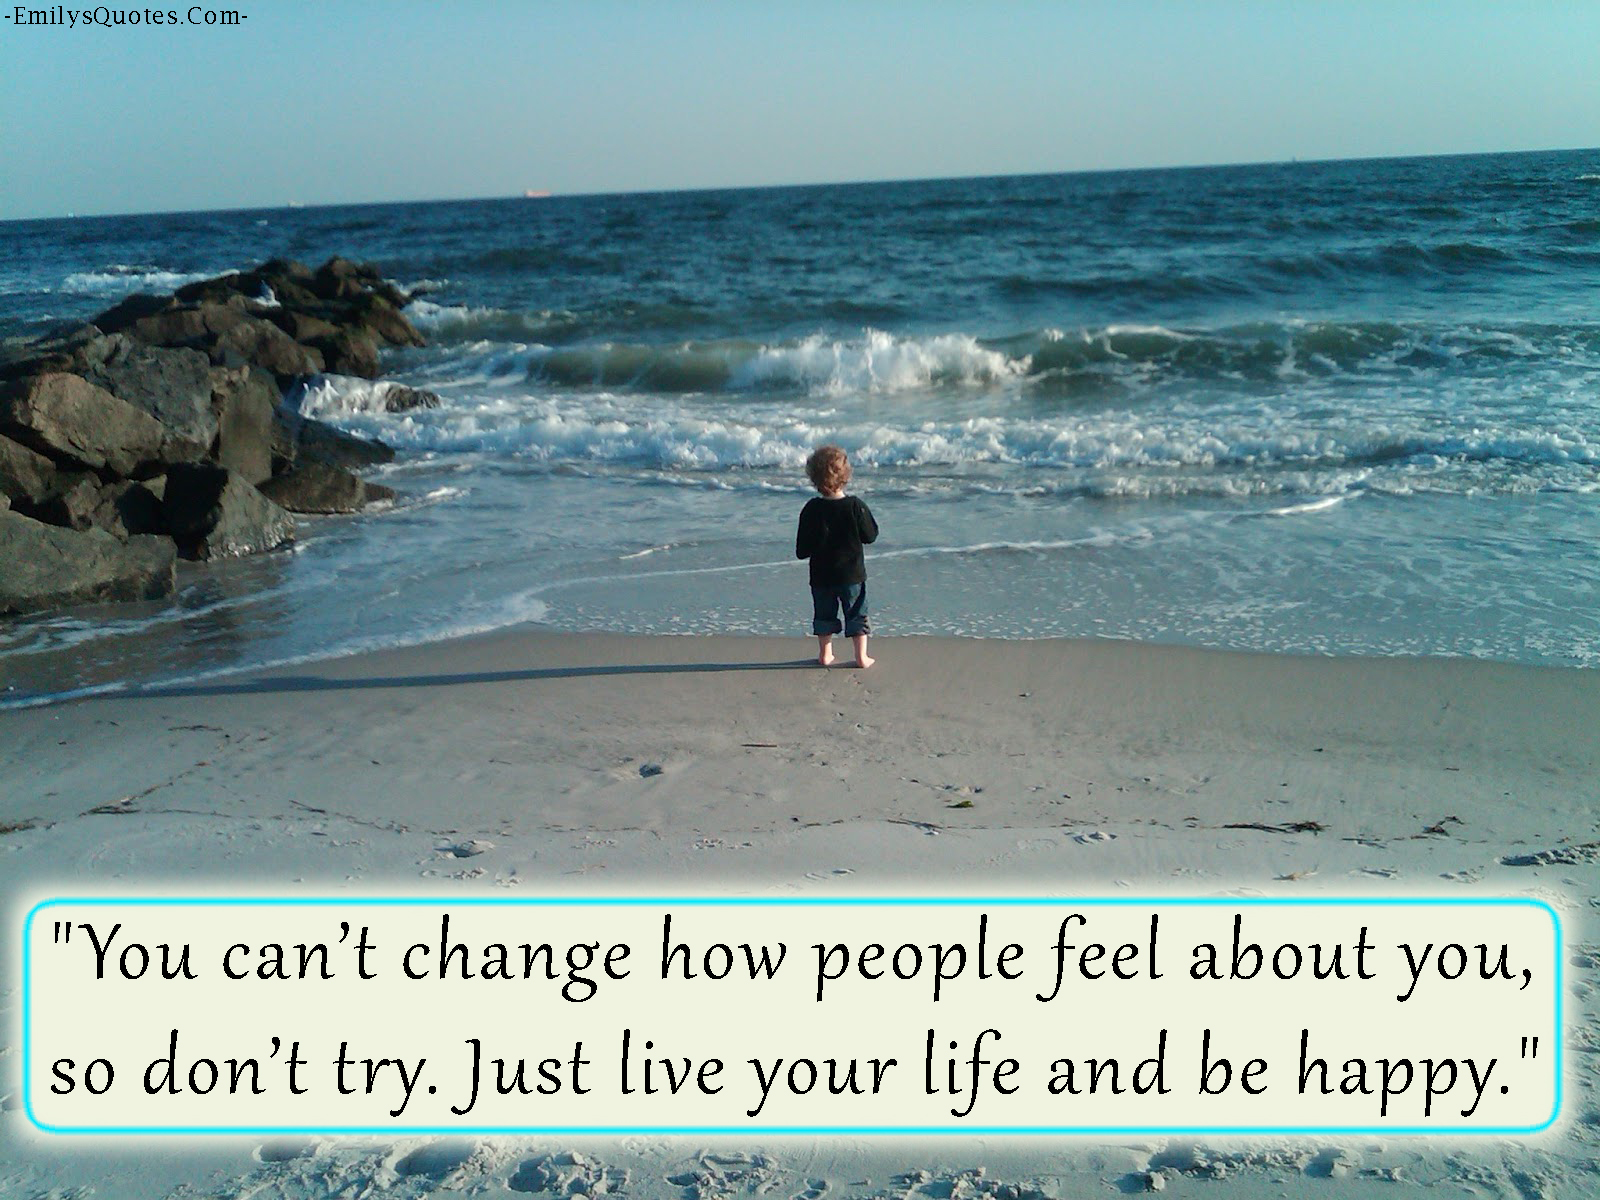 You can’t change how people feel about you, so don’t try. Just live your life and be happy